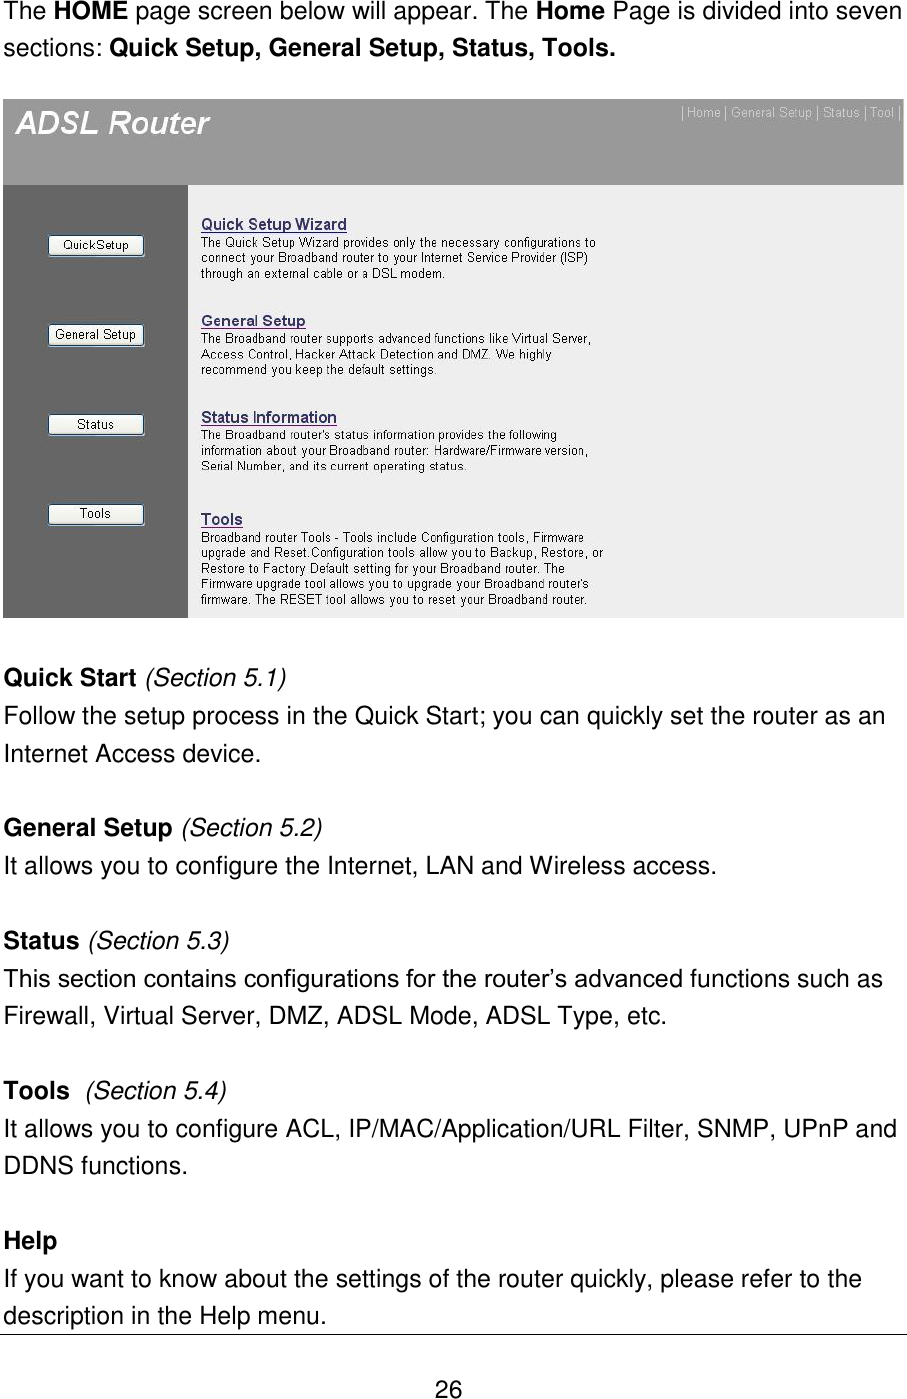   26 The HOME page screen below will appear. The Home Page is divided into seven sections: Quick Setup, General Setup, Status, Tools.     Quick Start (Section 5.1) Follow the setup process in the Quick Start; you can quickly set the router as an Internet Access device.  General Setup (Section 5.2) It allows you to configure the Internet, LAN and Wireless access.  Status (Section 5.3) This section contains configurations for the router’s advanced functions such as Firewall, Virtual Server, DMZ, ADSL Mode, ADSL Type, etc.   Tools  (Section 5.4) It allows you to configure ACL, IP/MAC/Application/URL Filter, SNMP, UPnP and DDNS functions.   Help If you want to know about the settings of the router quickly, please refer to the description in the Help menu. 